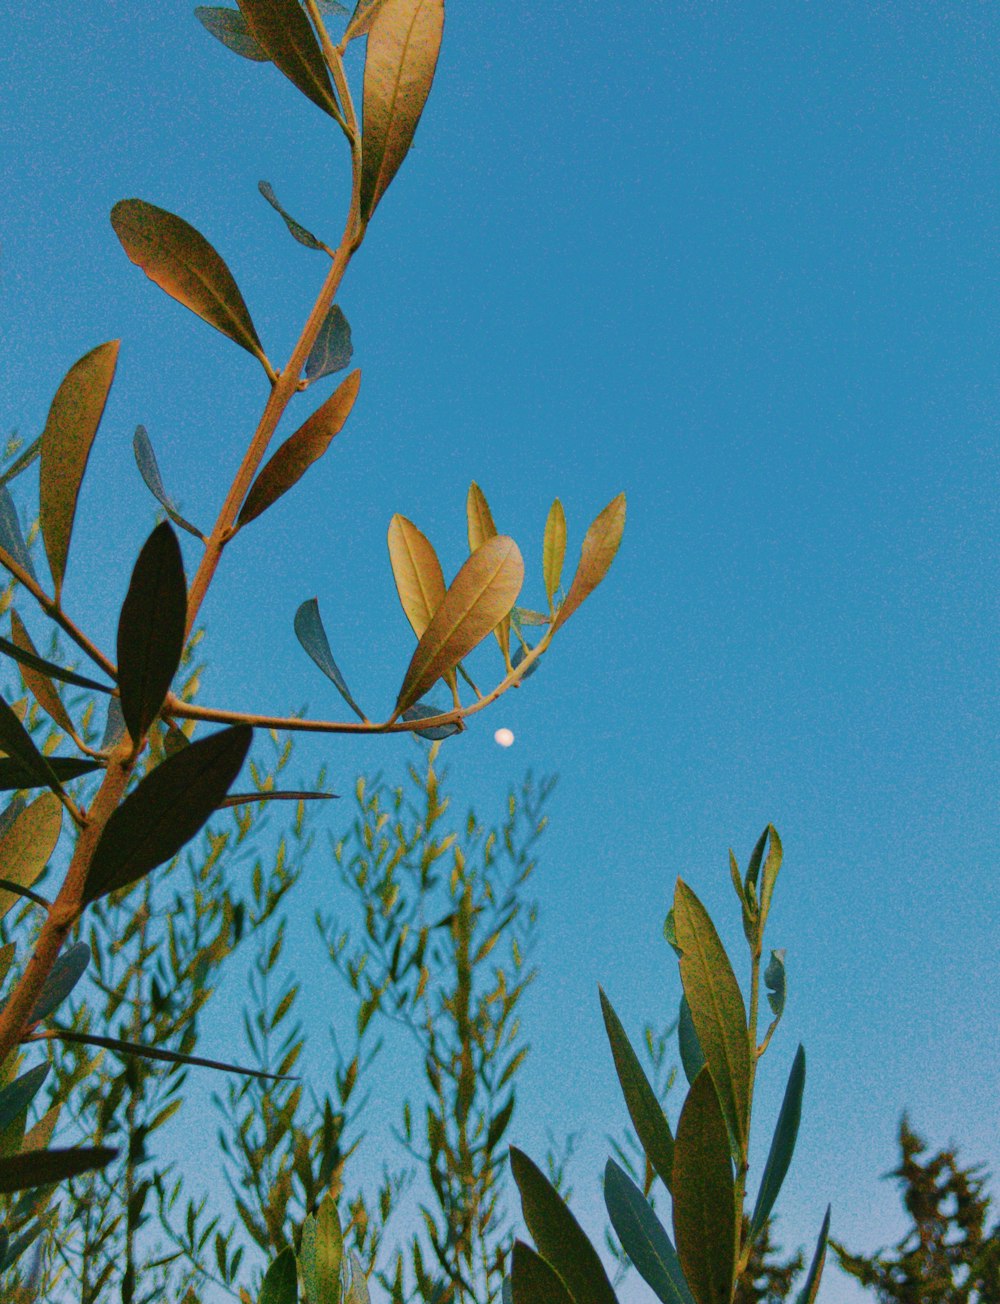 green and brown leaves under blue sky during daytime